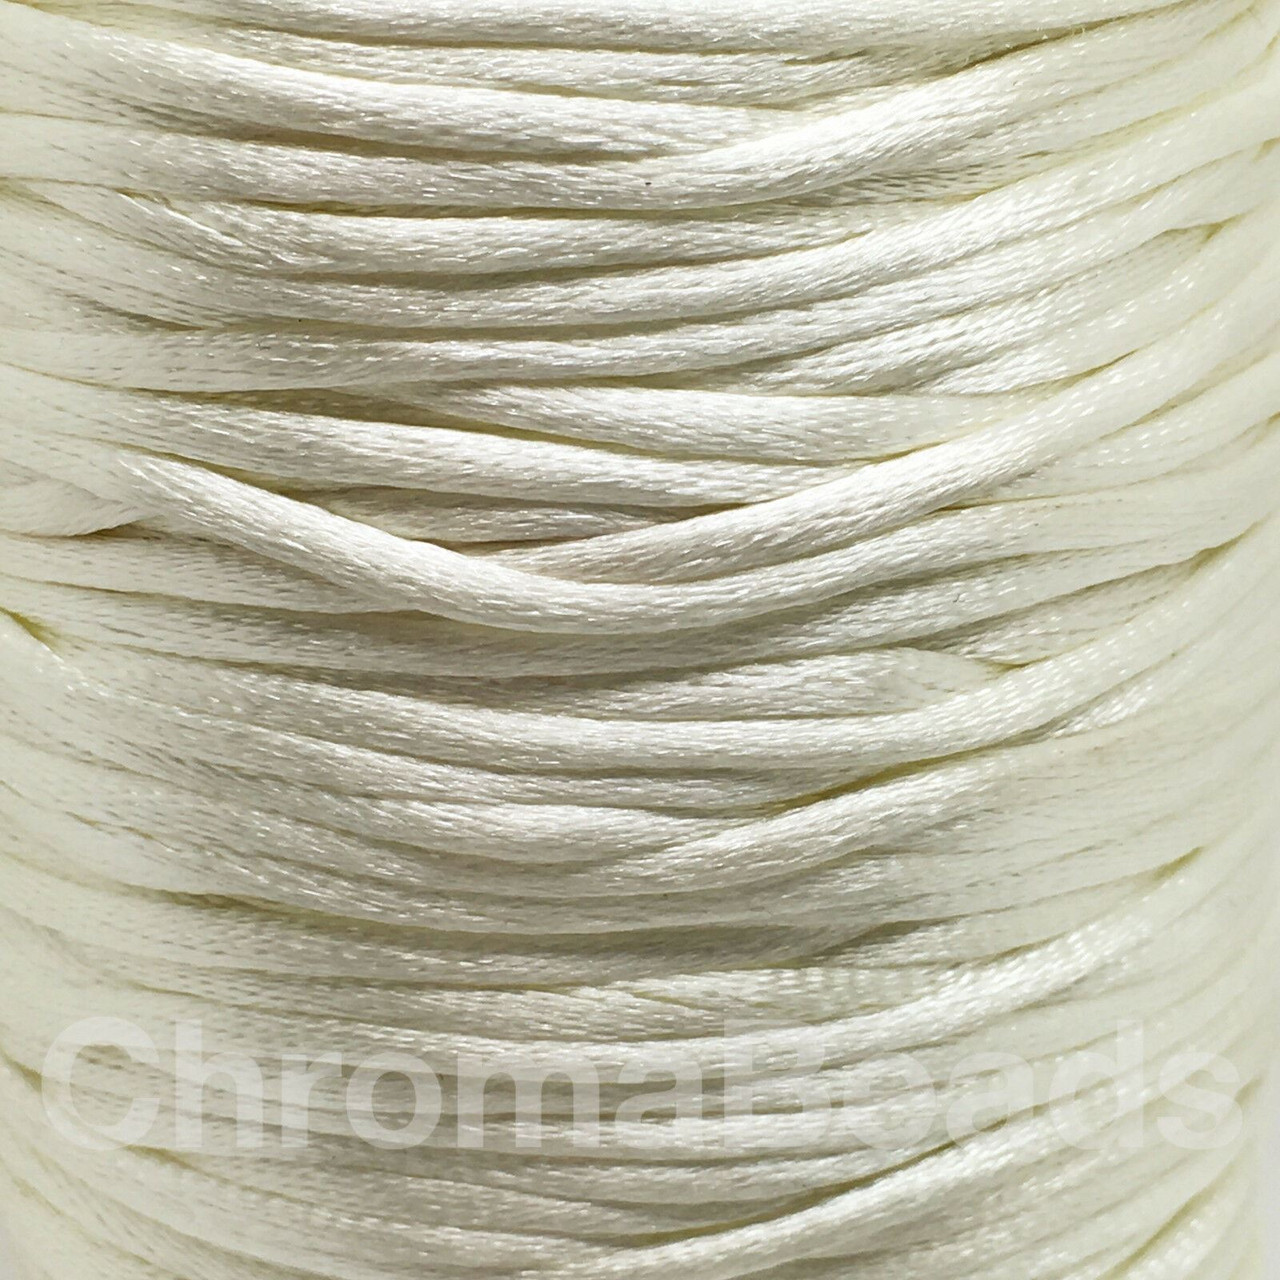 Reel of Nylon Cord (Rattail) - Ivory, approx 45m